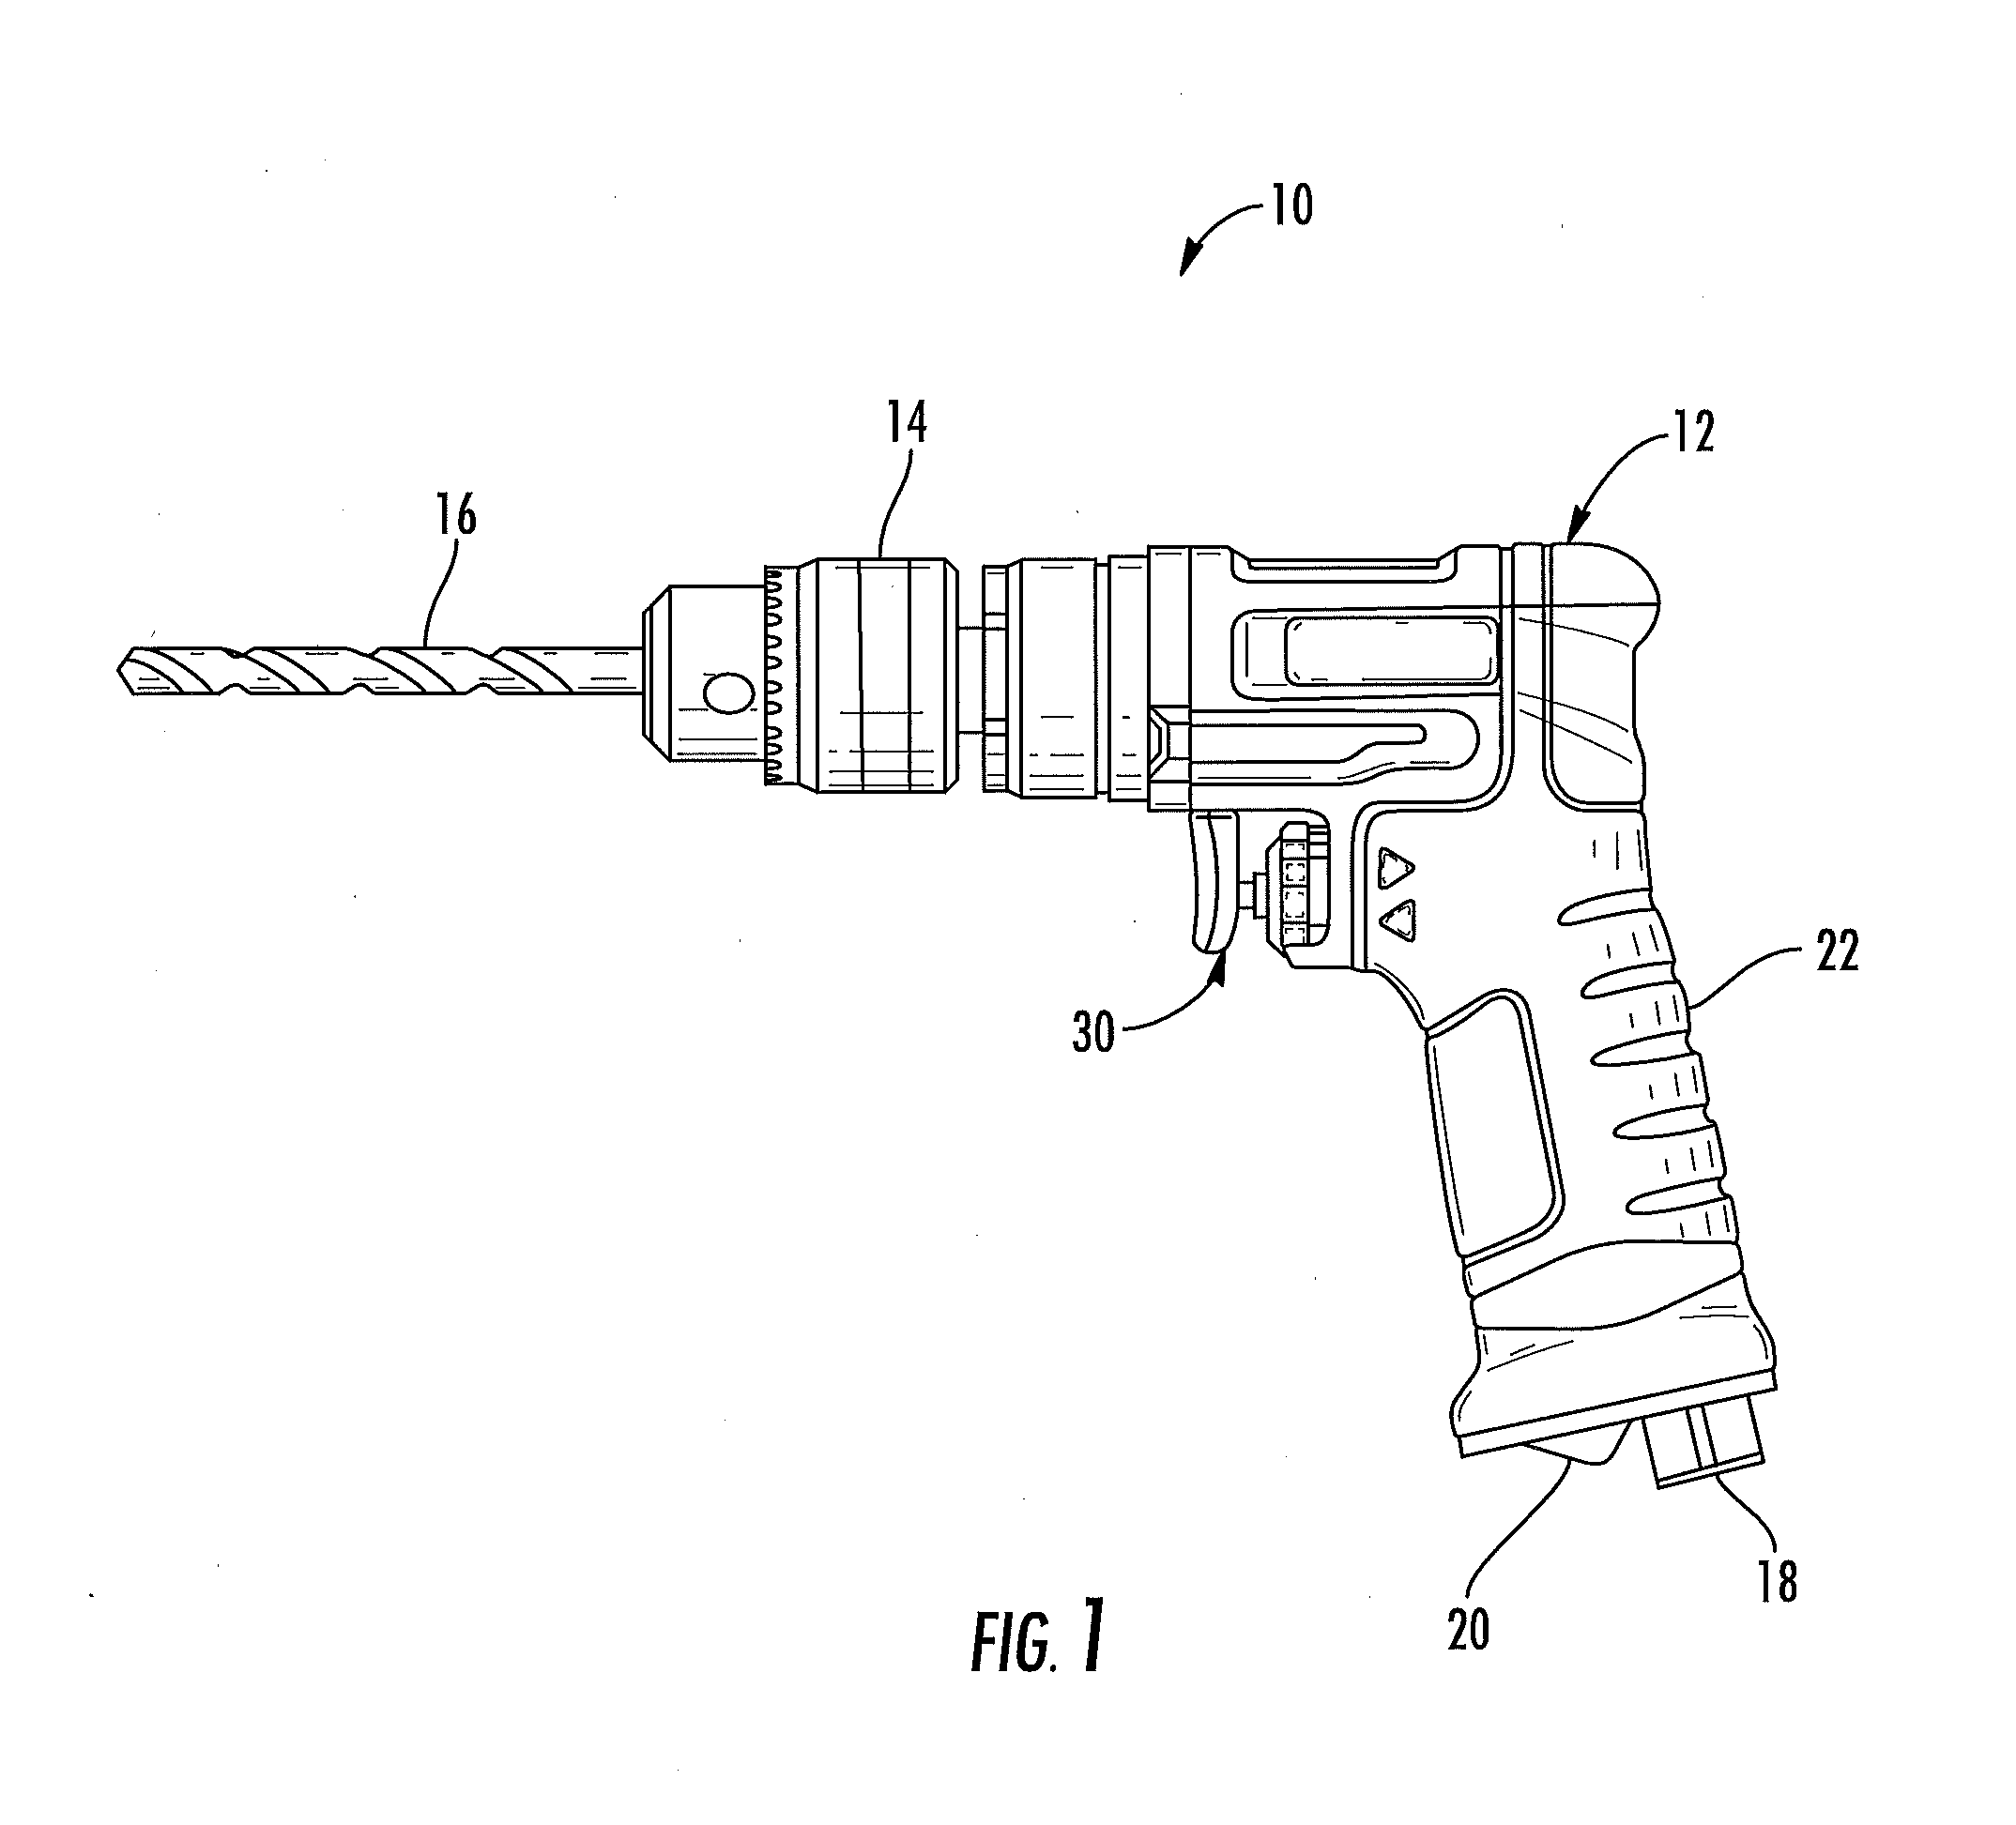 Power tool with fluid boost